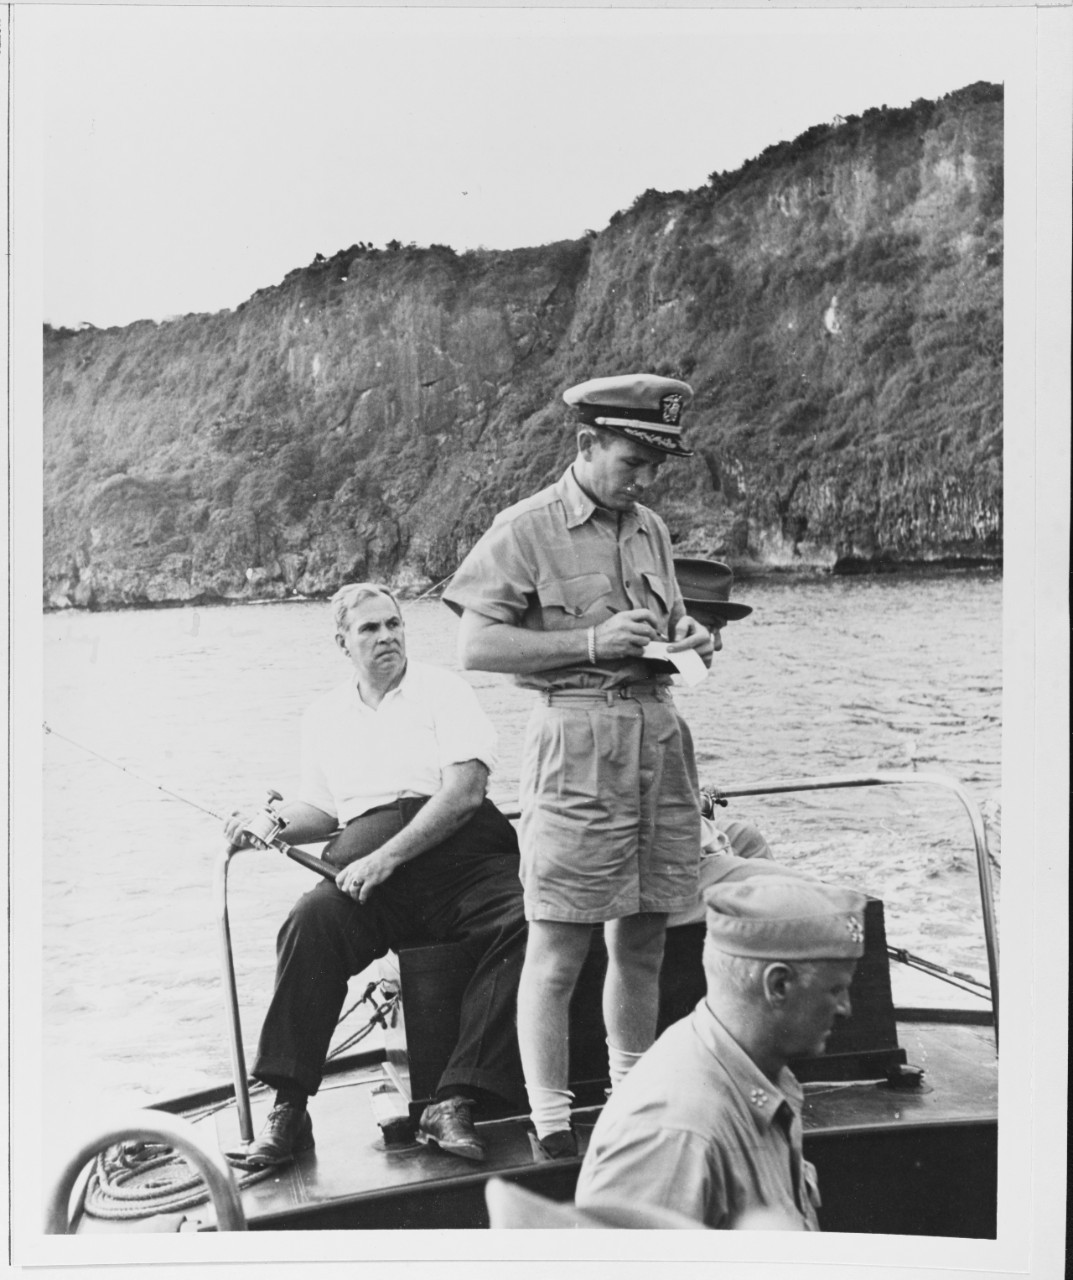 Fleet Admiral C.W. Nimitz on a Short Fishing and Sightseeing Tour